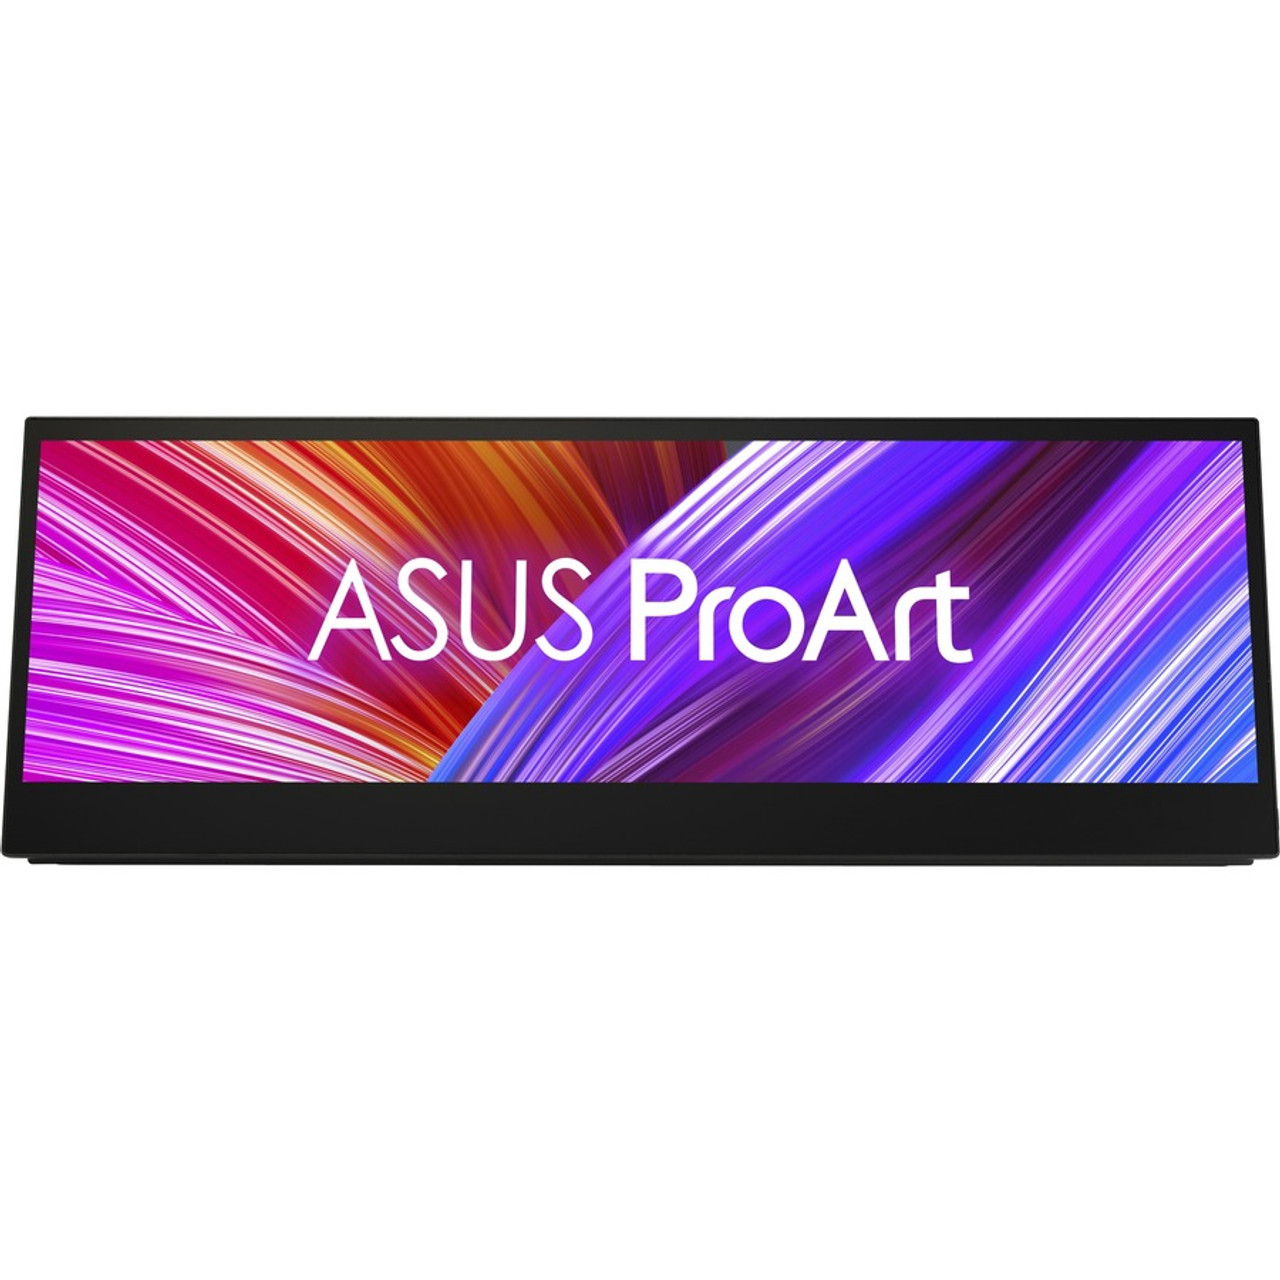 Asus ProArt PA278QV Review - The BEST Value Monitor in 2021?! 